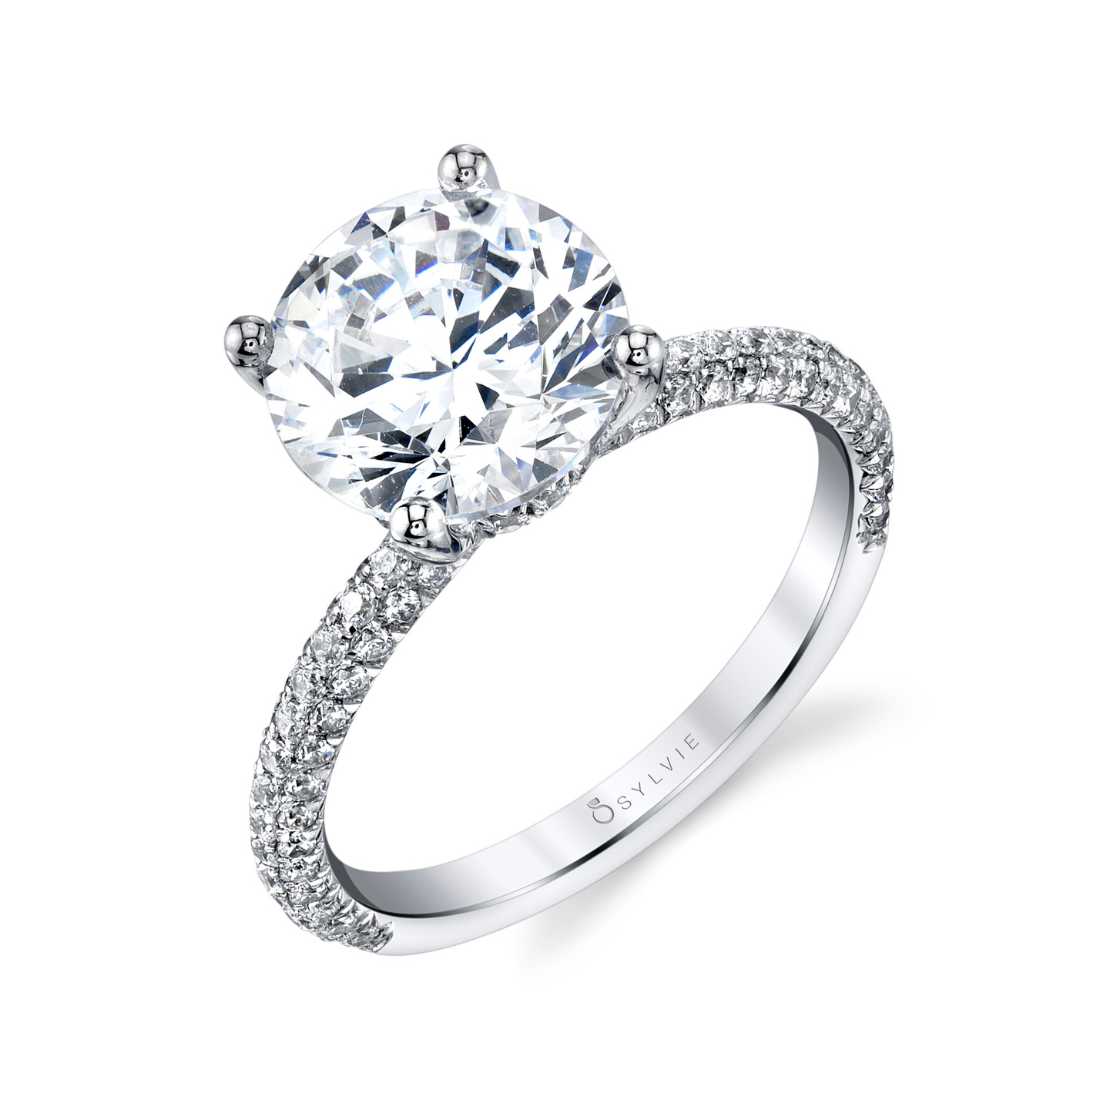 3 carat diamond engagement ring with pave setting